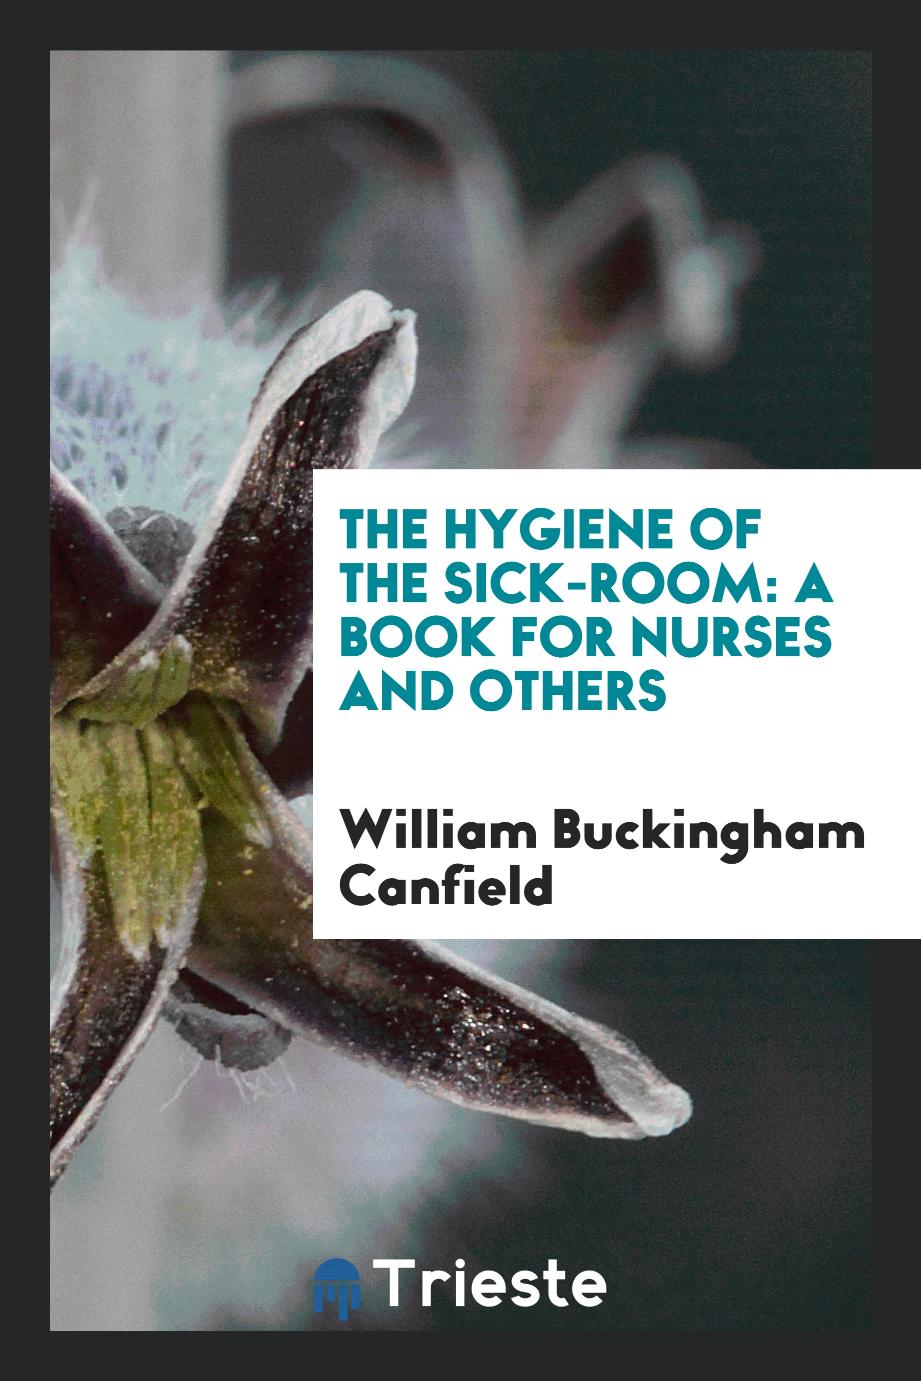 The hygiene of the sick-room: a book for nurses and others